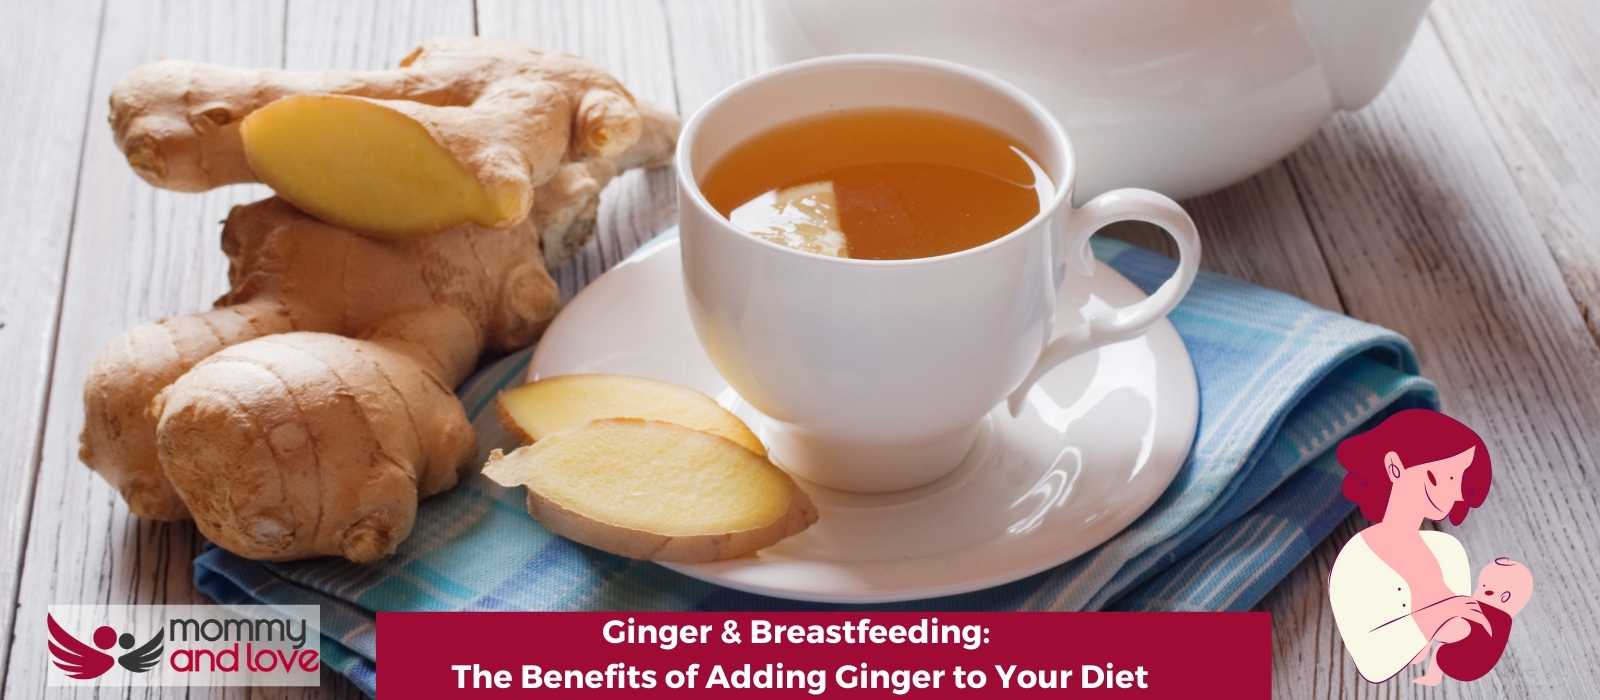 Ginger & Breastfeeding The Benefits of Adding Ginger to Your Diet